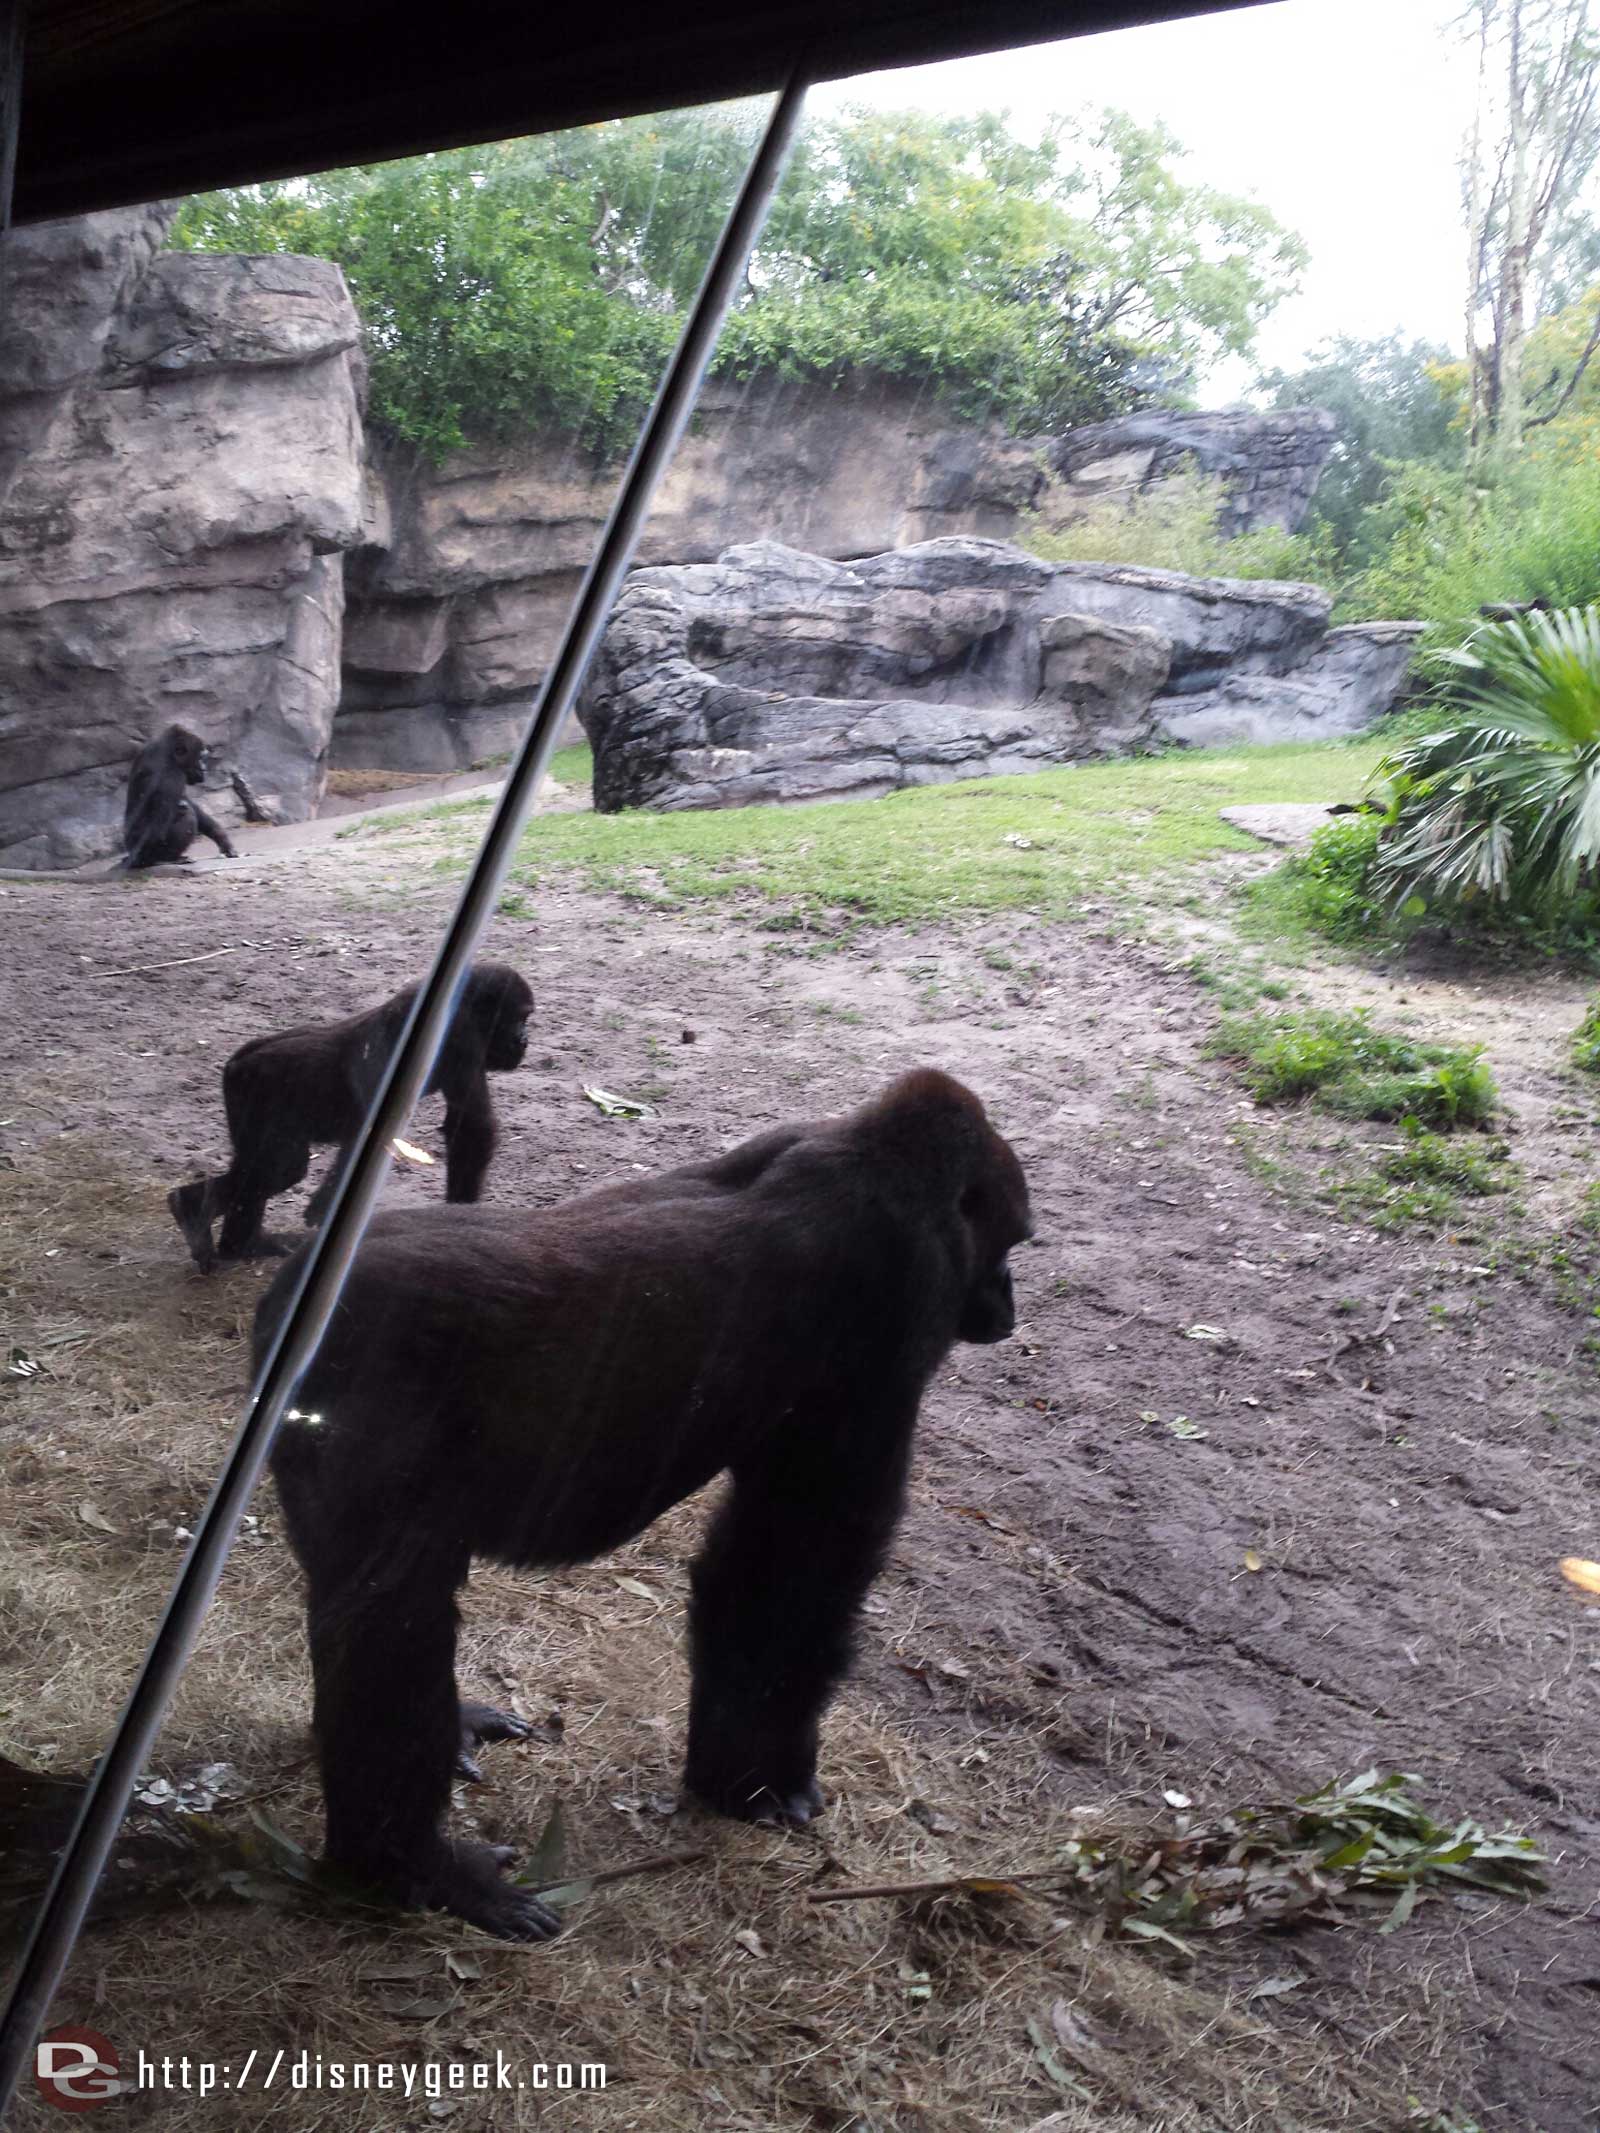 Same goes for these three gorillas along the Pangani Forest Exploration Trail